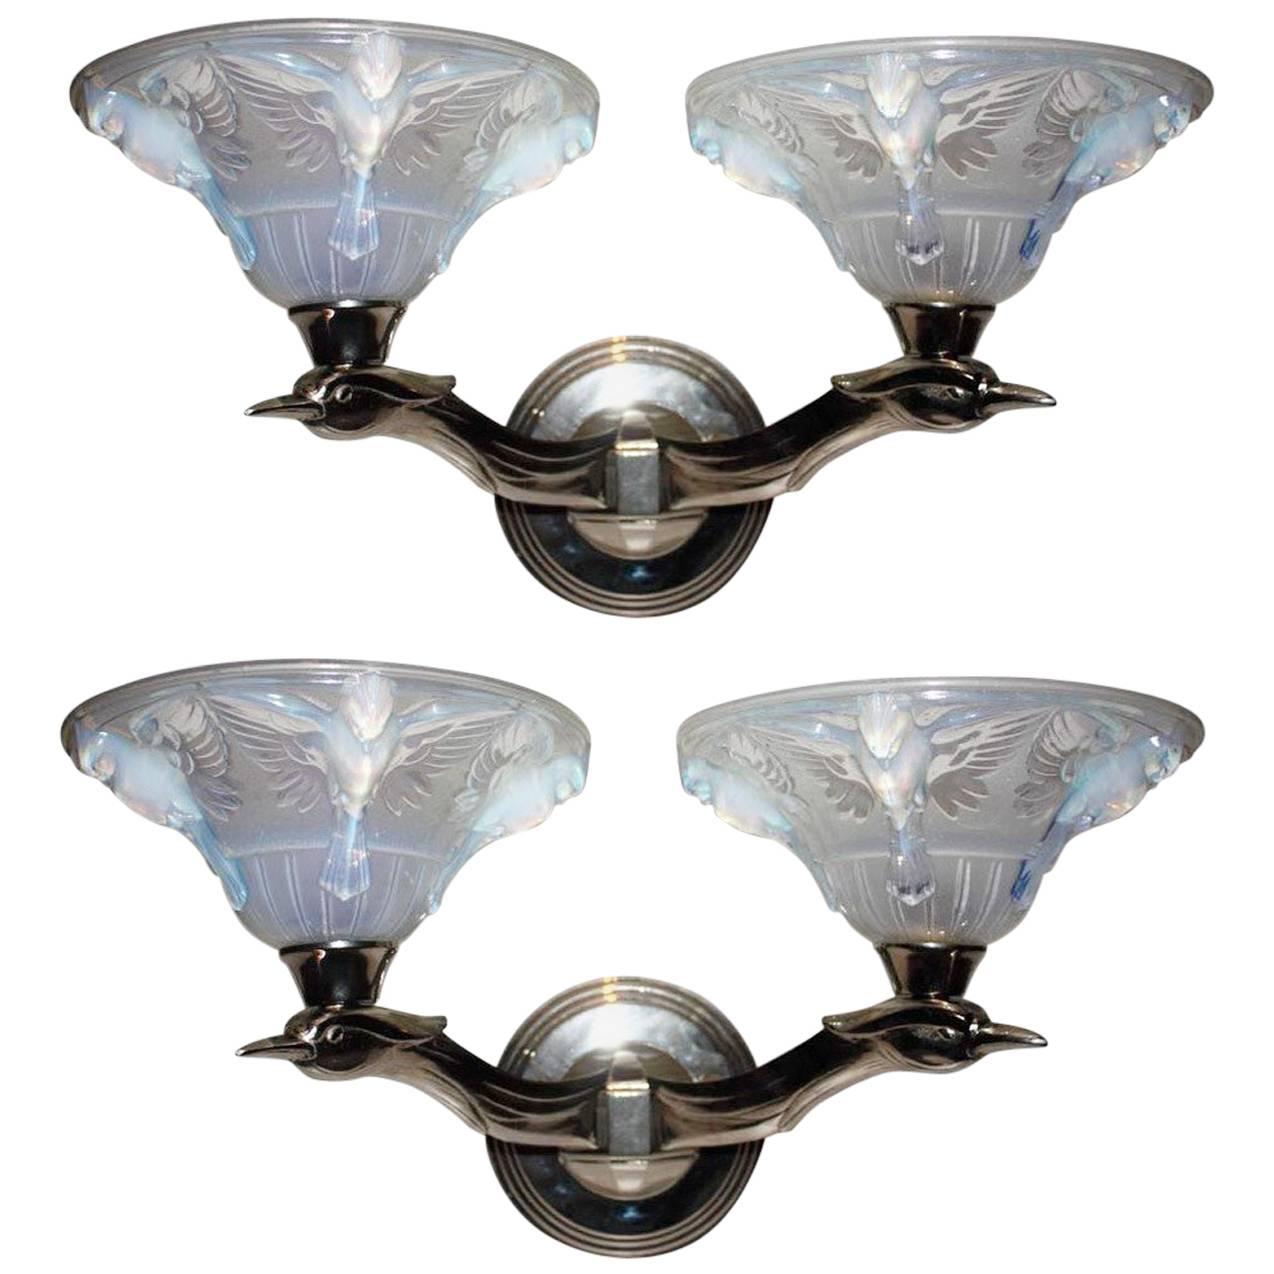 Pair of Wall Sconces, Nickeled Bronze and Opalescent Glass, France, circa 1925